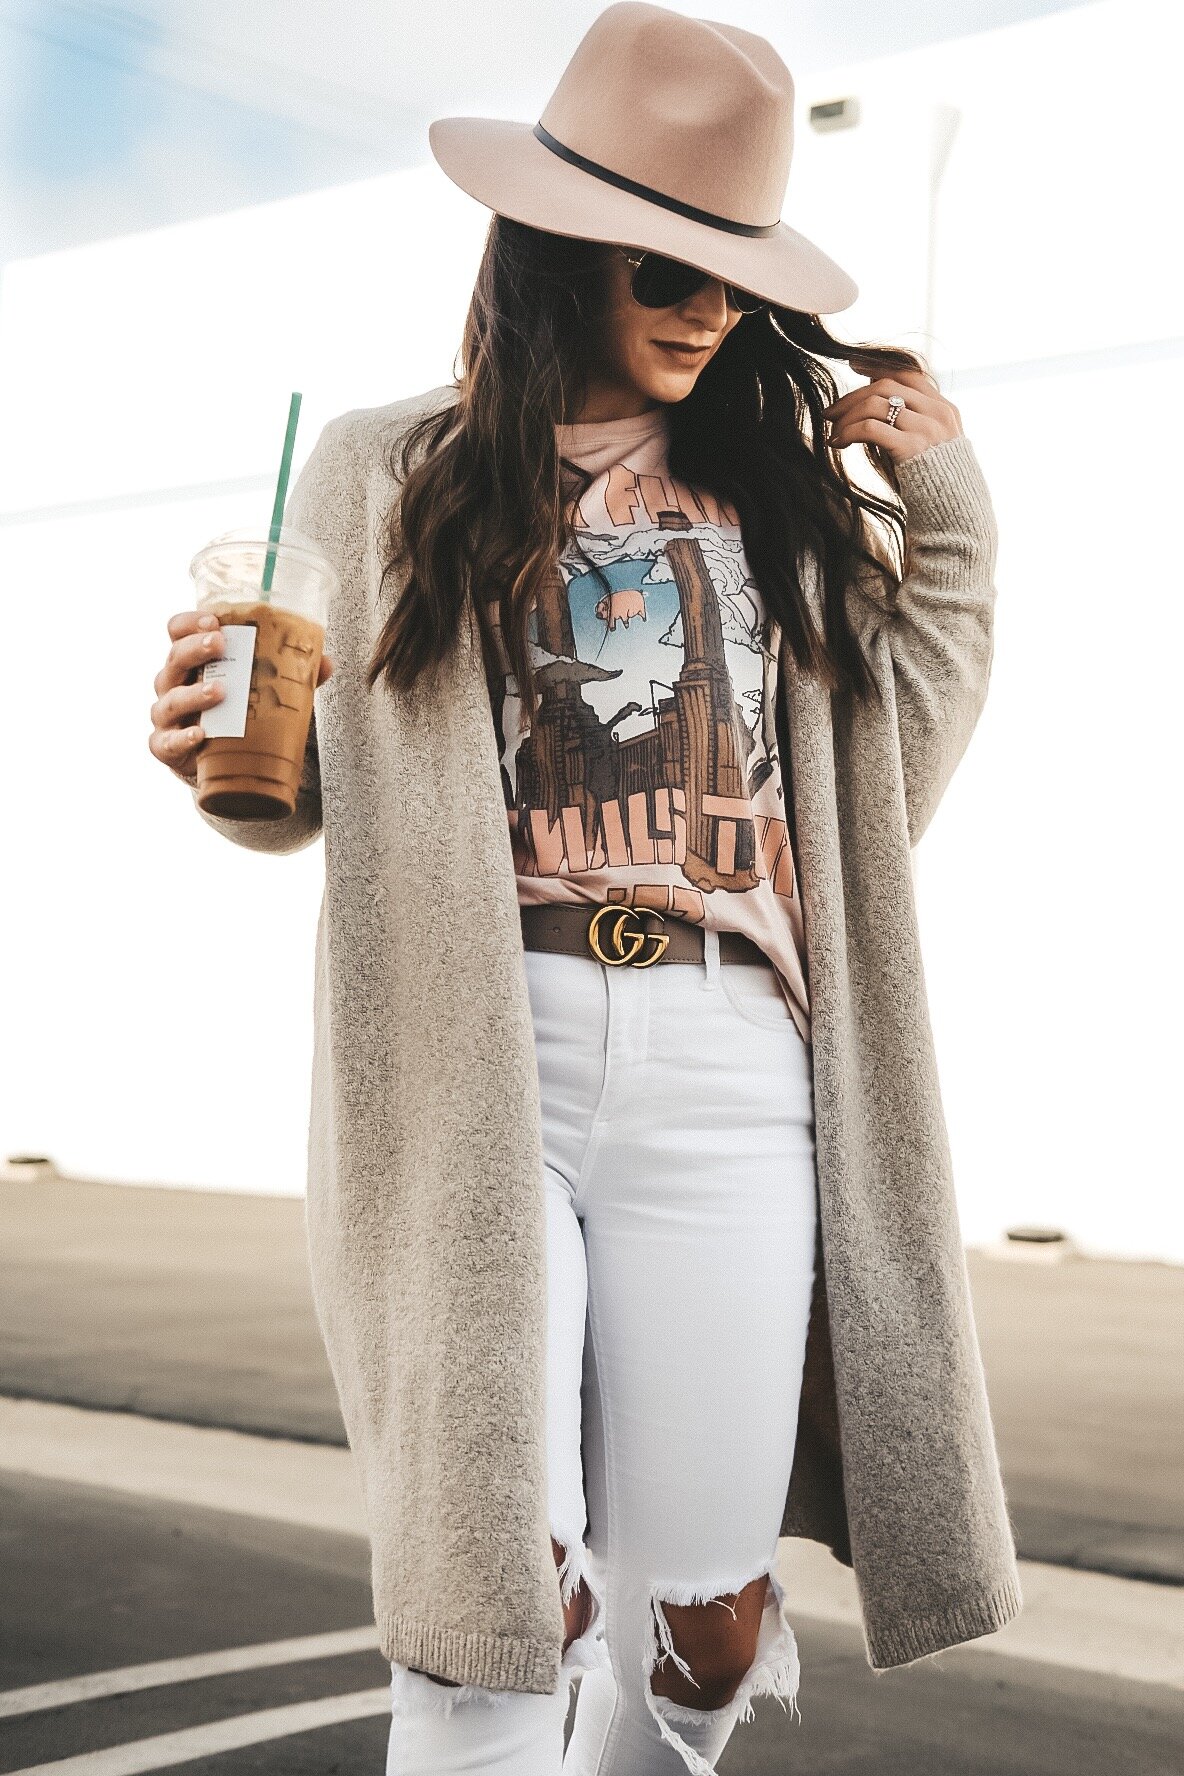 Neutral Fall Outfit Ideas - Jeans and a Teacup